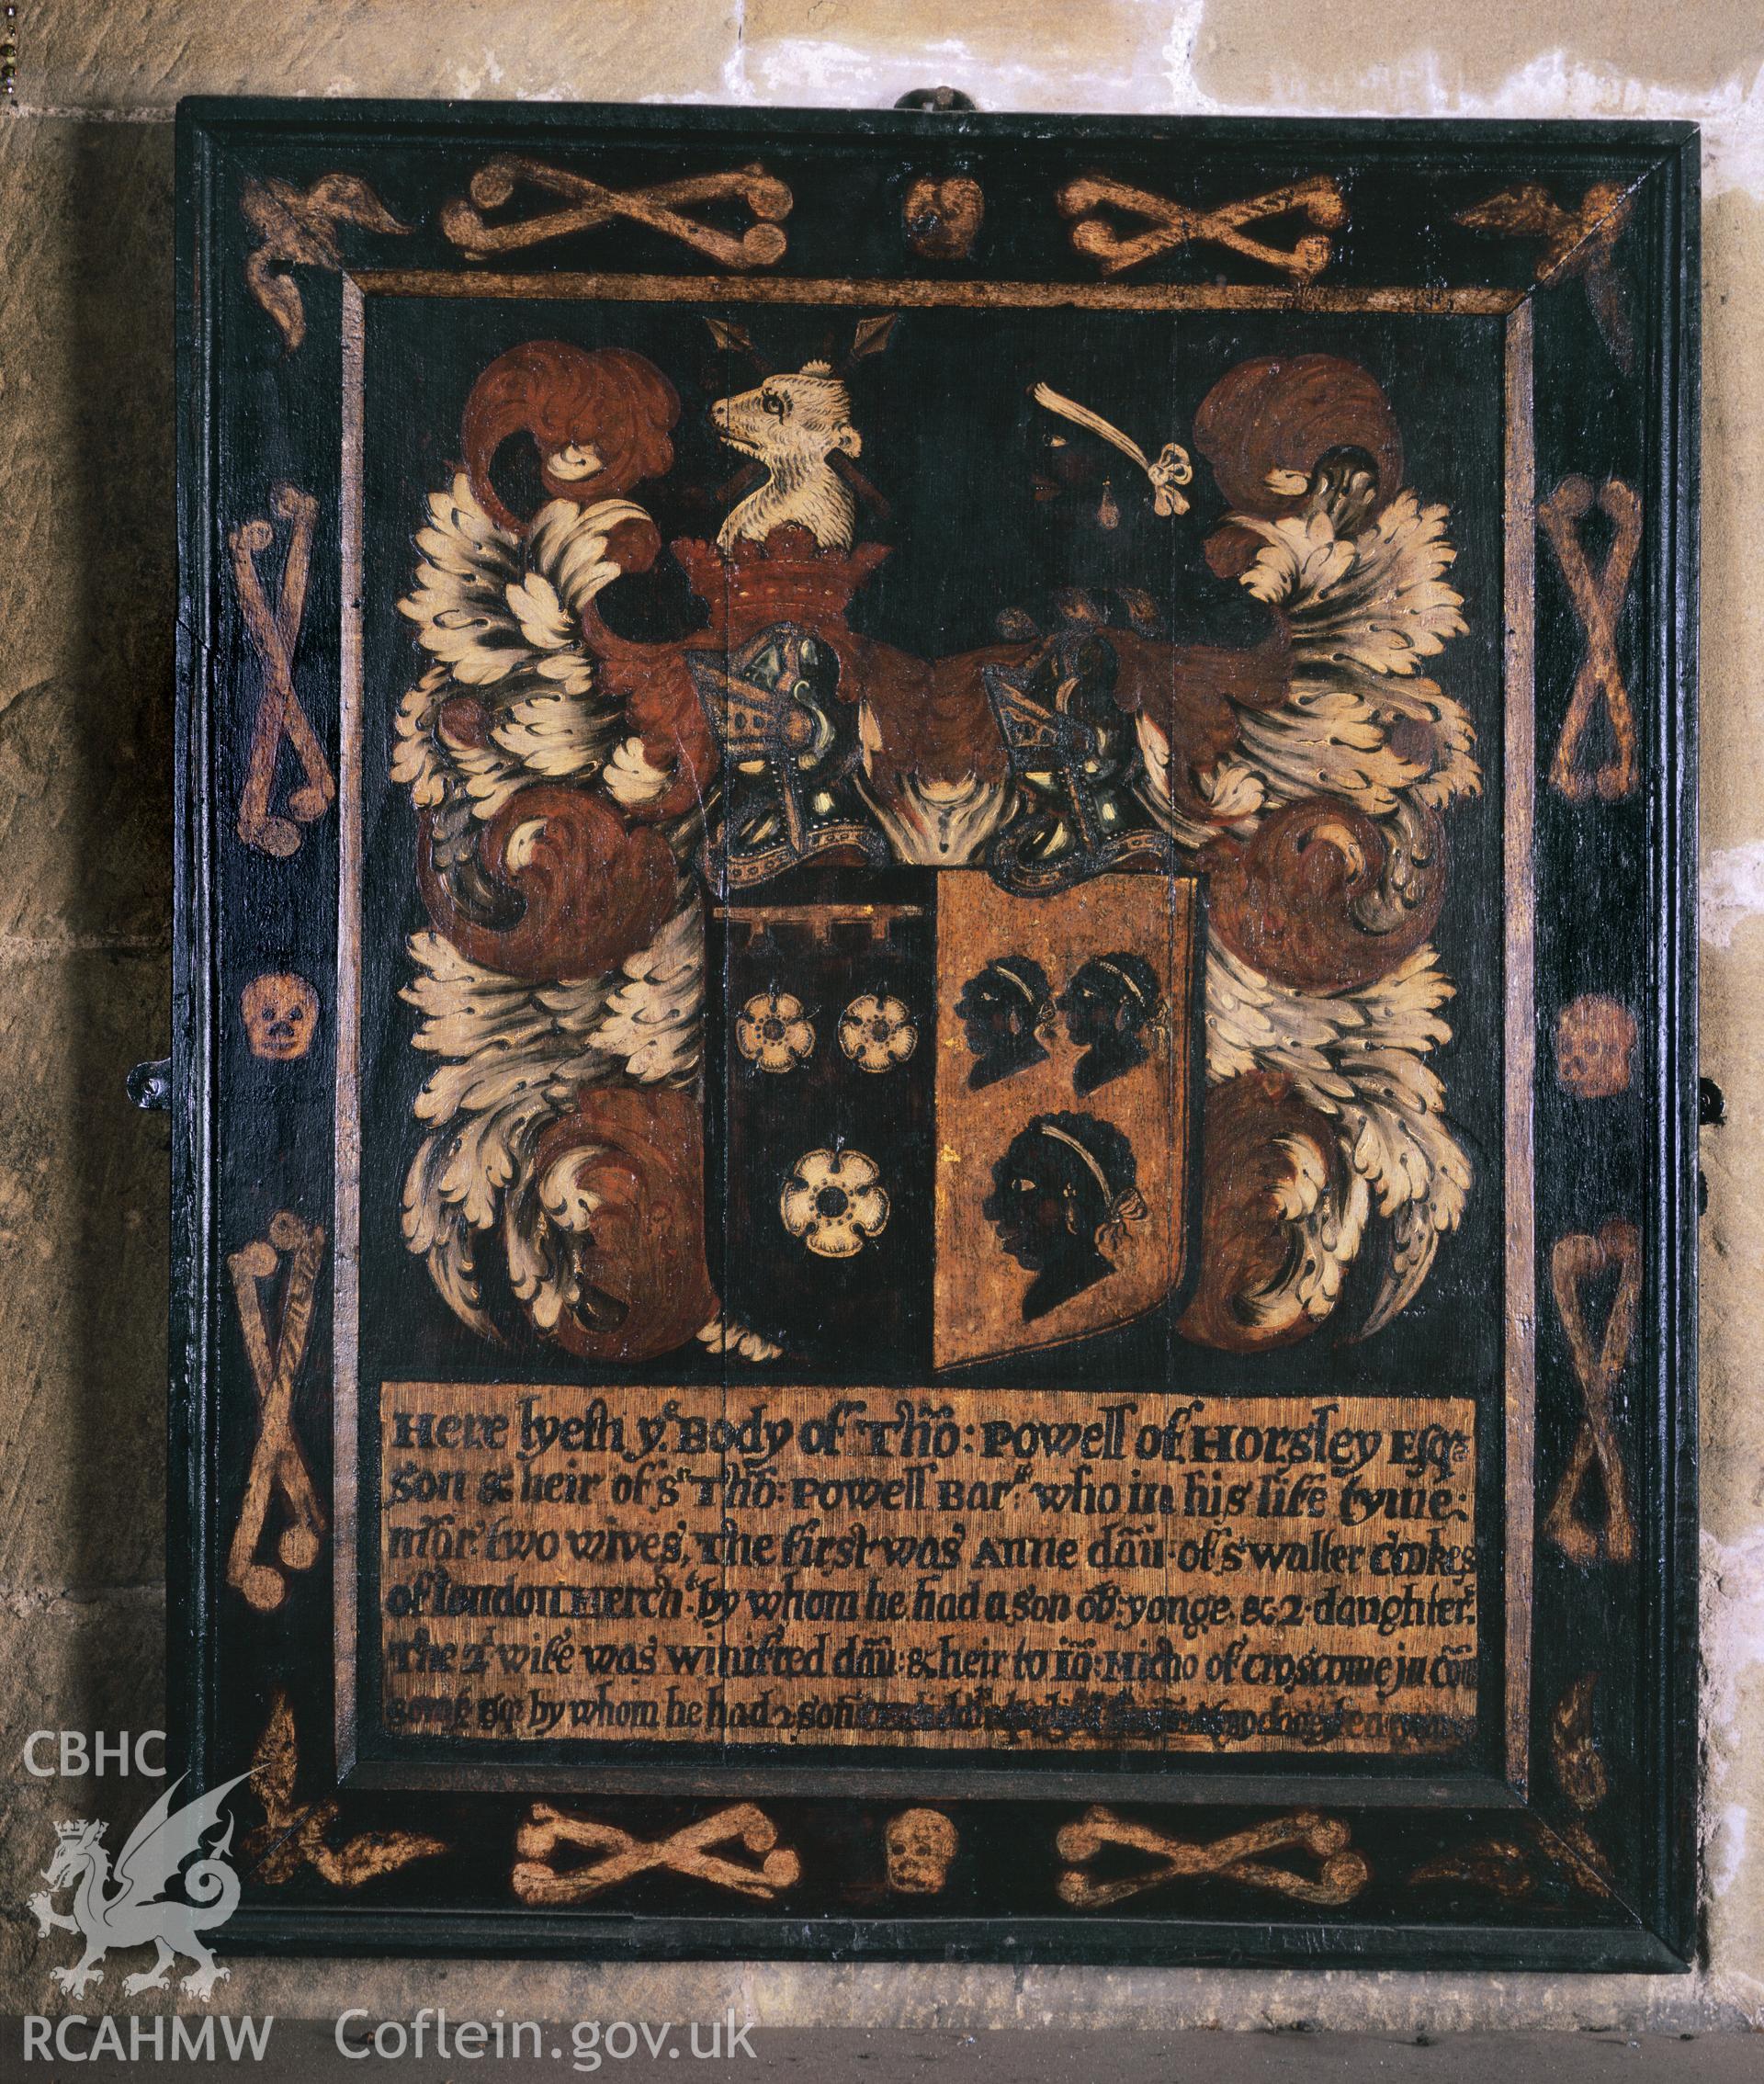 RCAHMW colour transparency showing memorial plaque to Thomas Powell at All Saints Church, Gresford, photographed by Iain Wright, 2001.